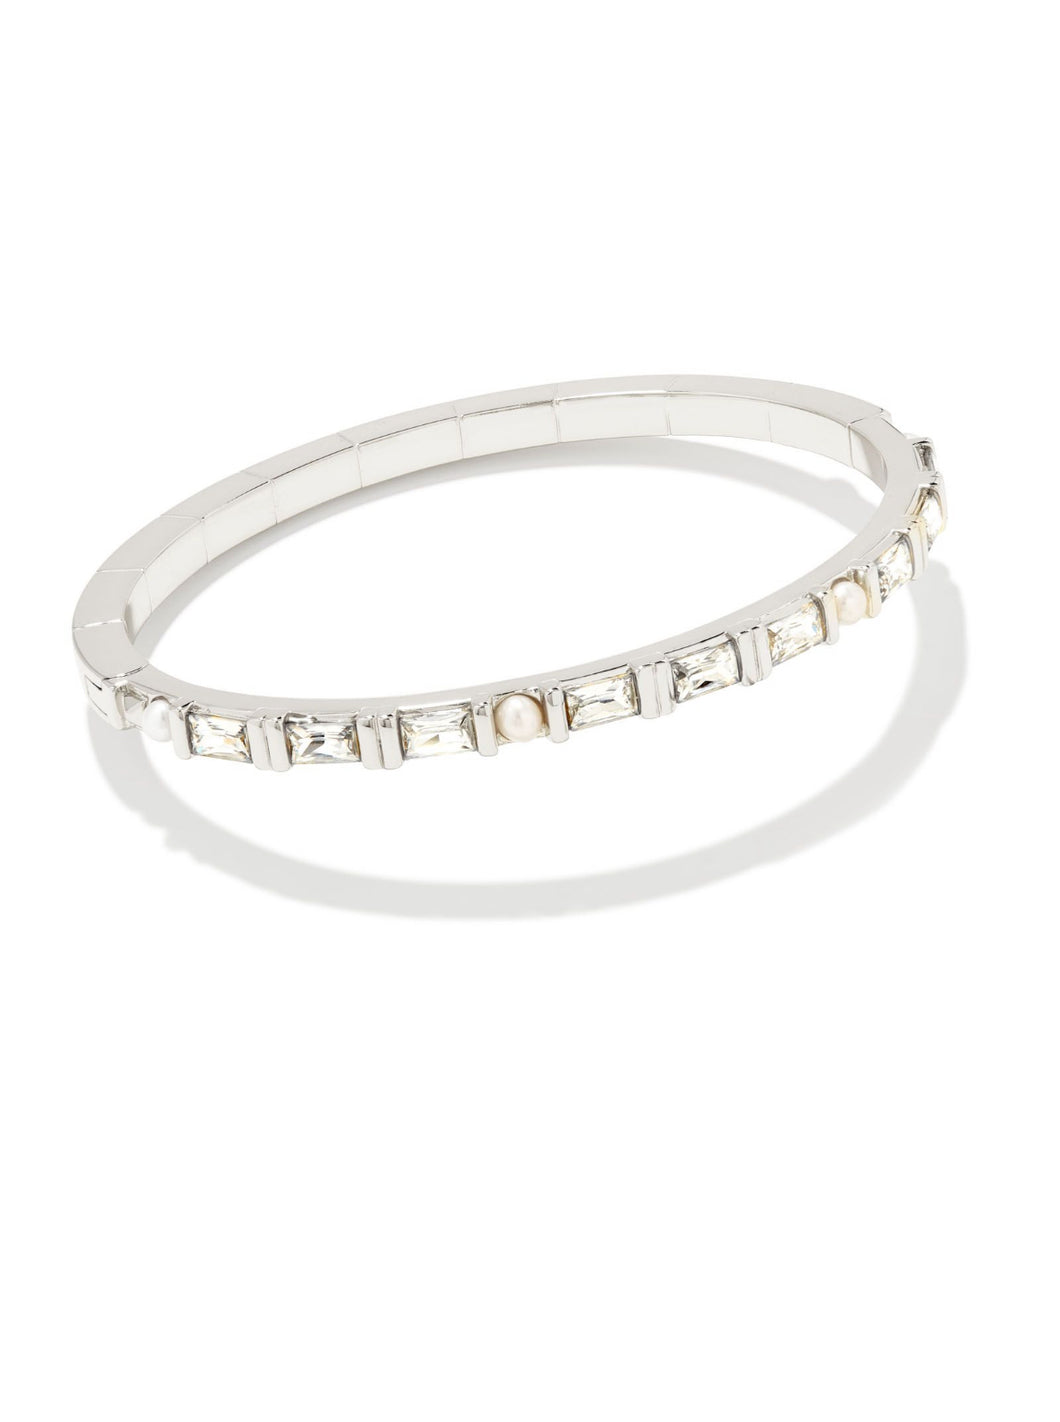 Kendra Scott: Gracie Bangle in Silver White Crystal